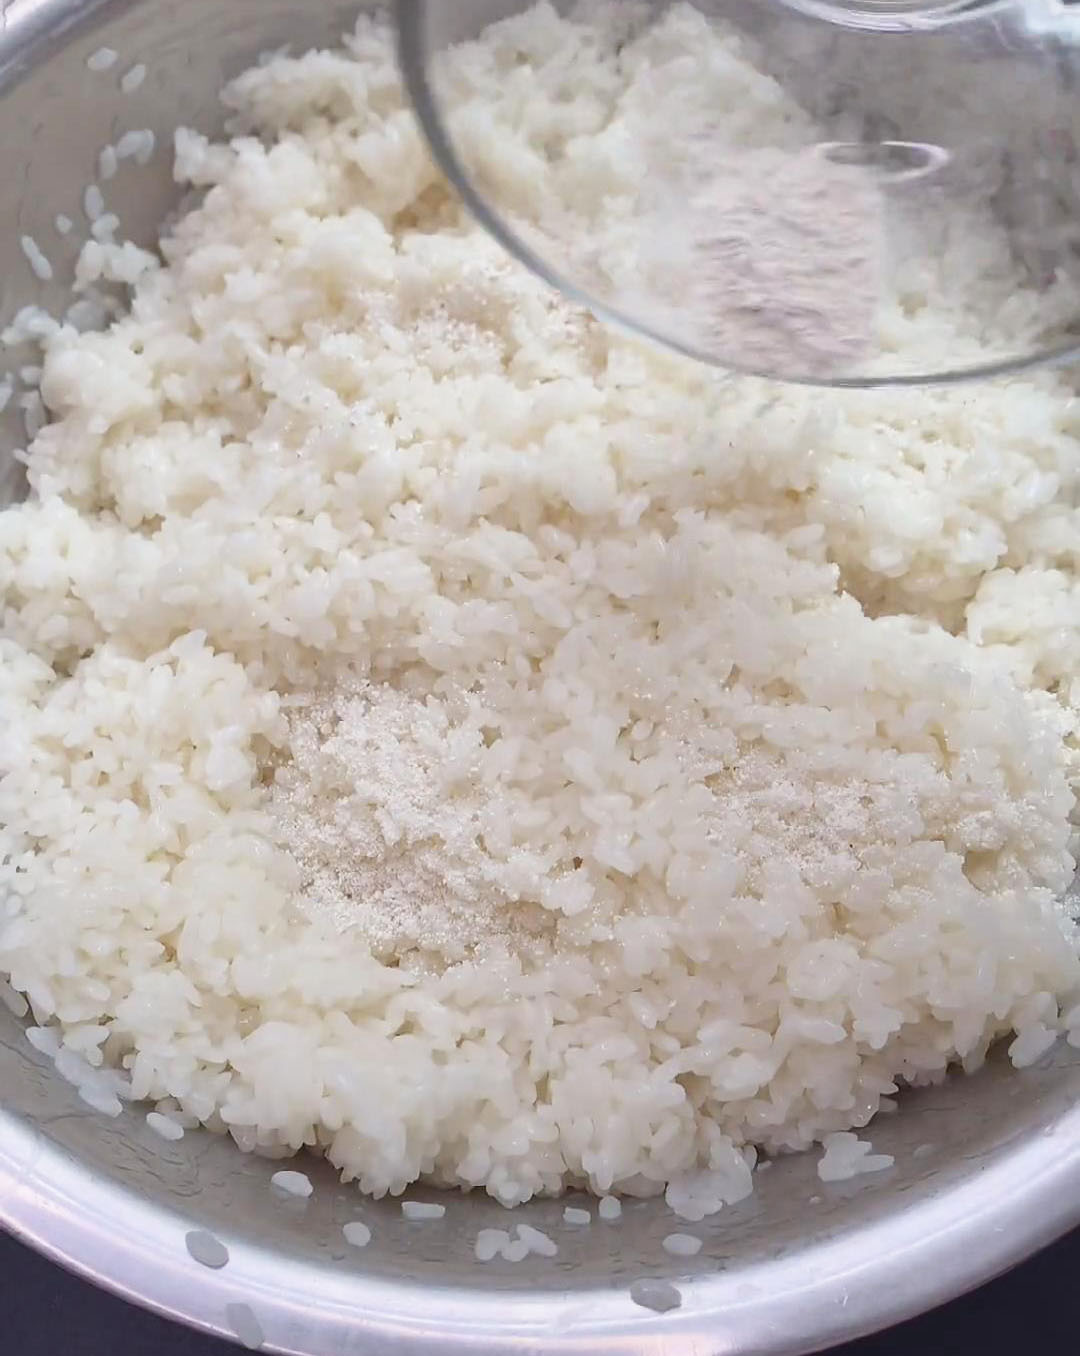 mix yeast thoroughly with the rice